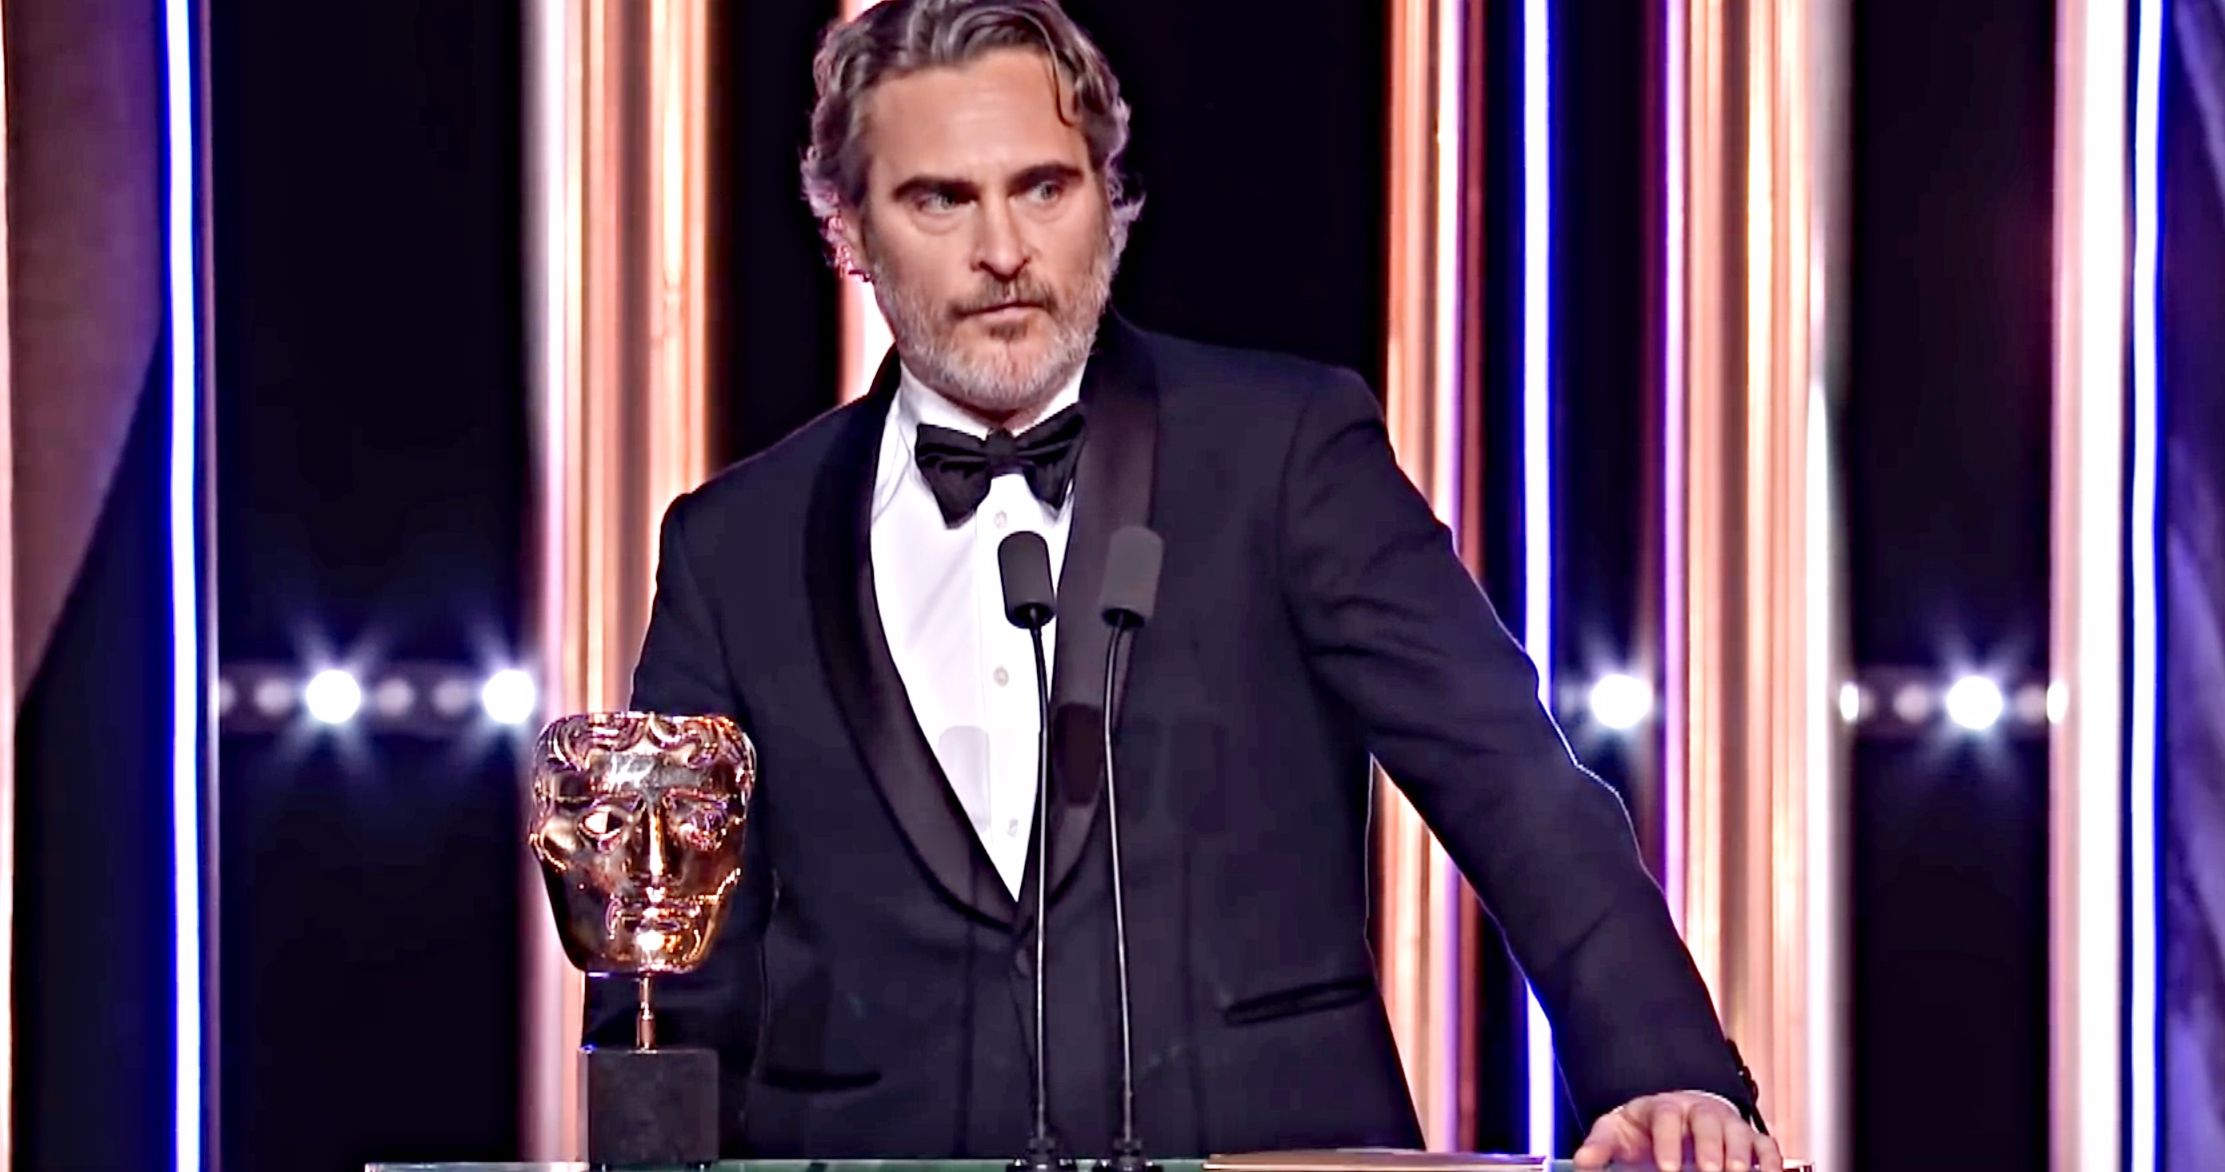 Joaquin Phoenix Lashes Out Against the Film Industry's 'Systemic Racism' in BAFTAs Joker Speech